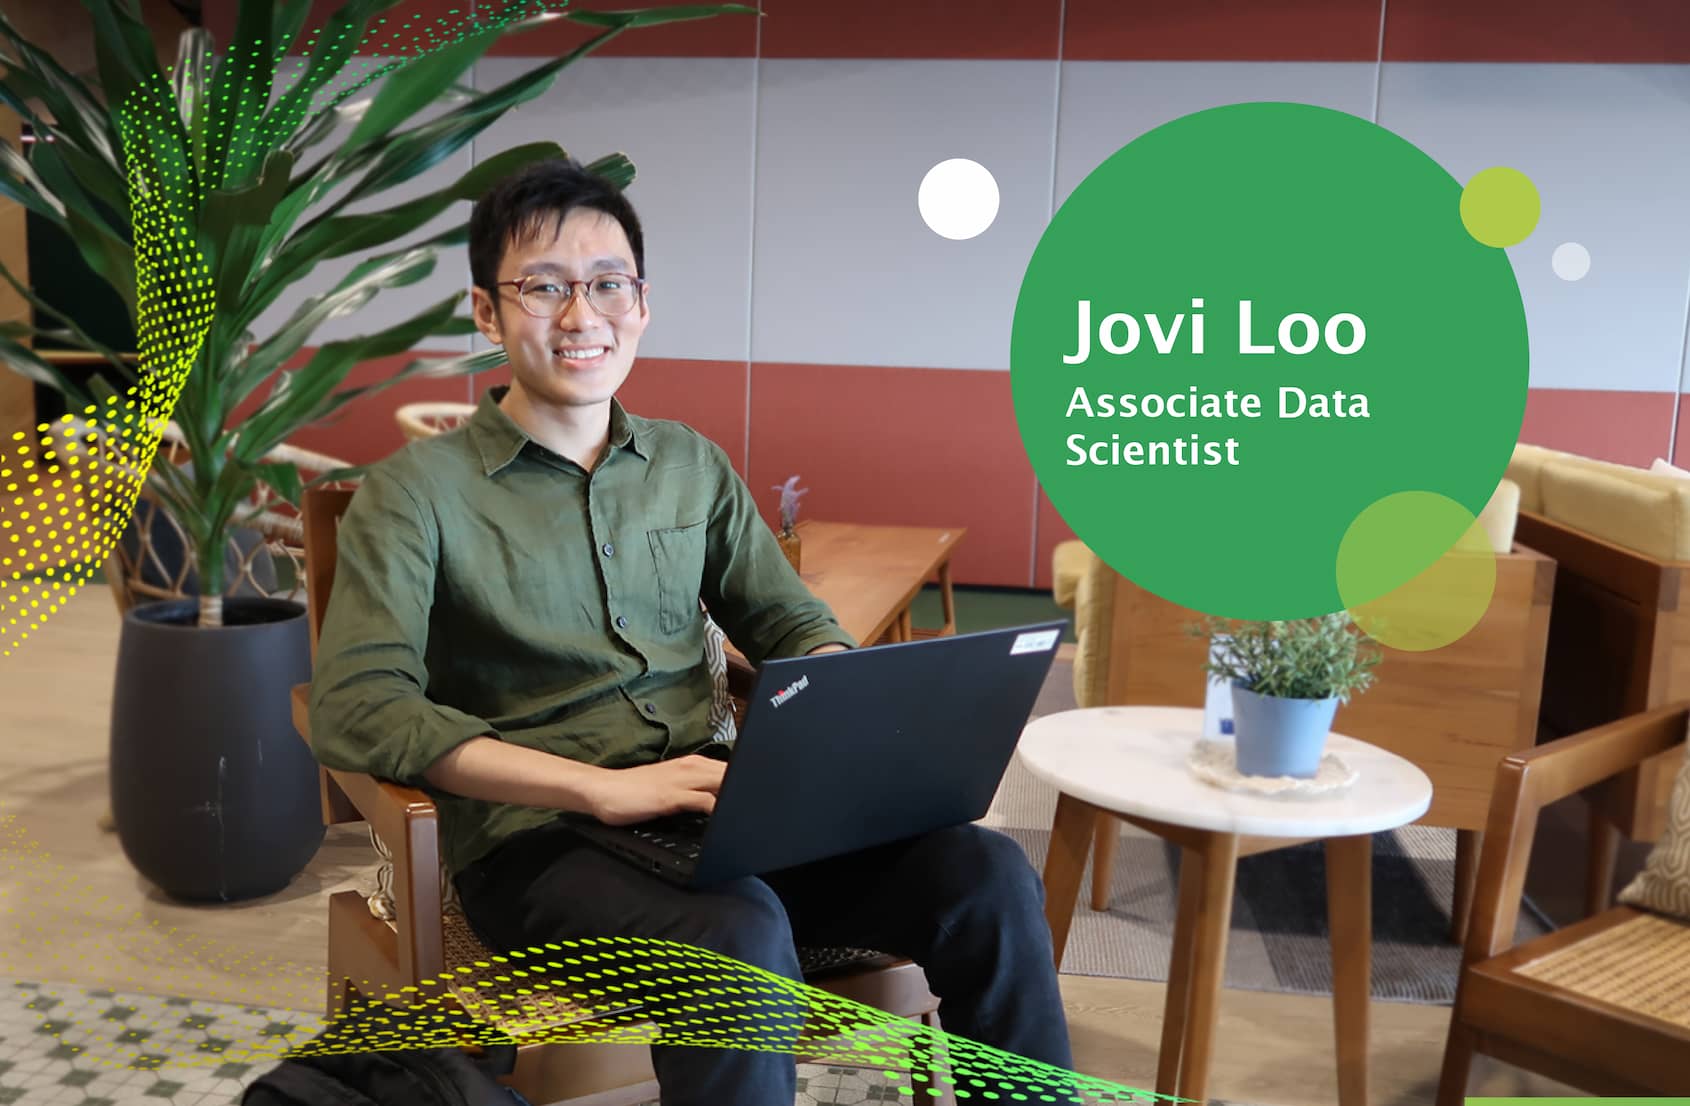 Jovi Loo - Associate Data Scientist from the TAP programme sharing what he does at GovTech